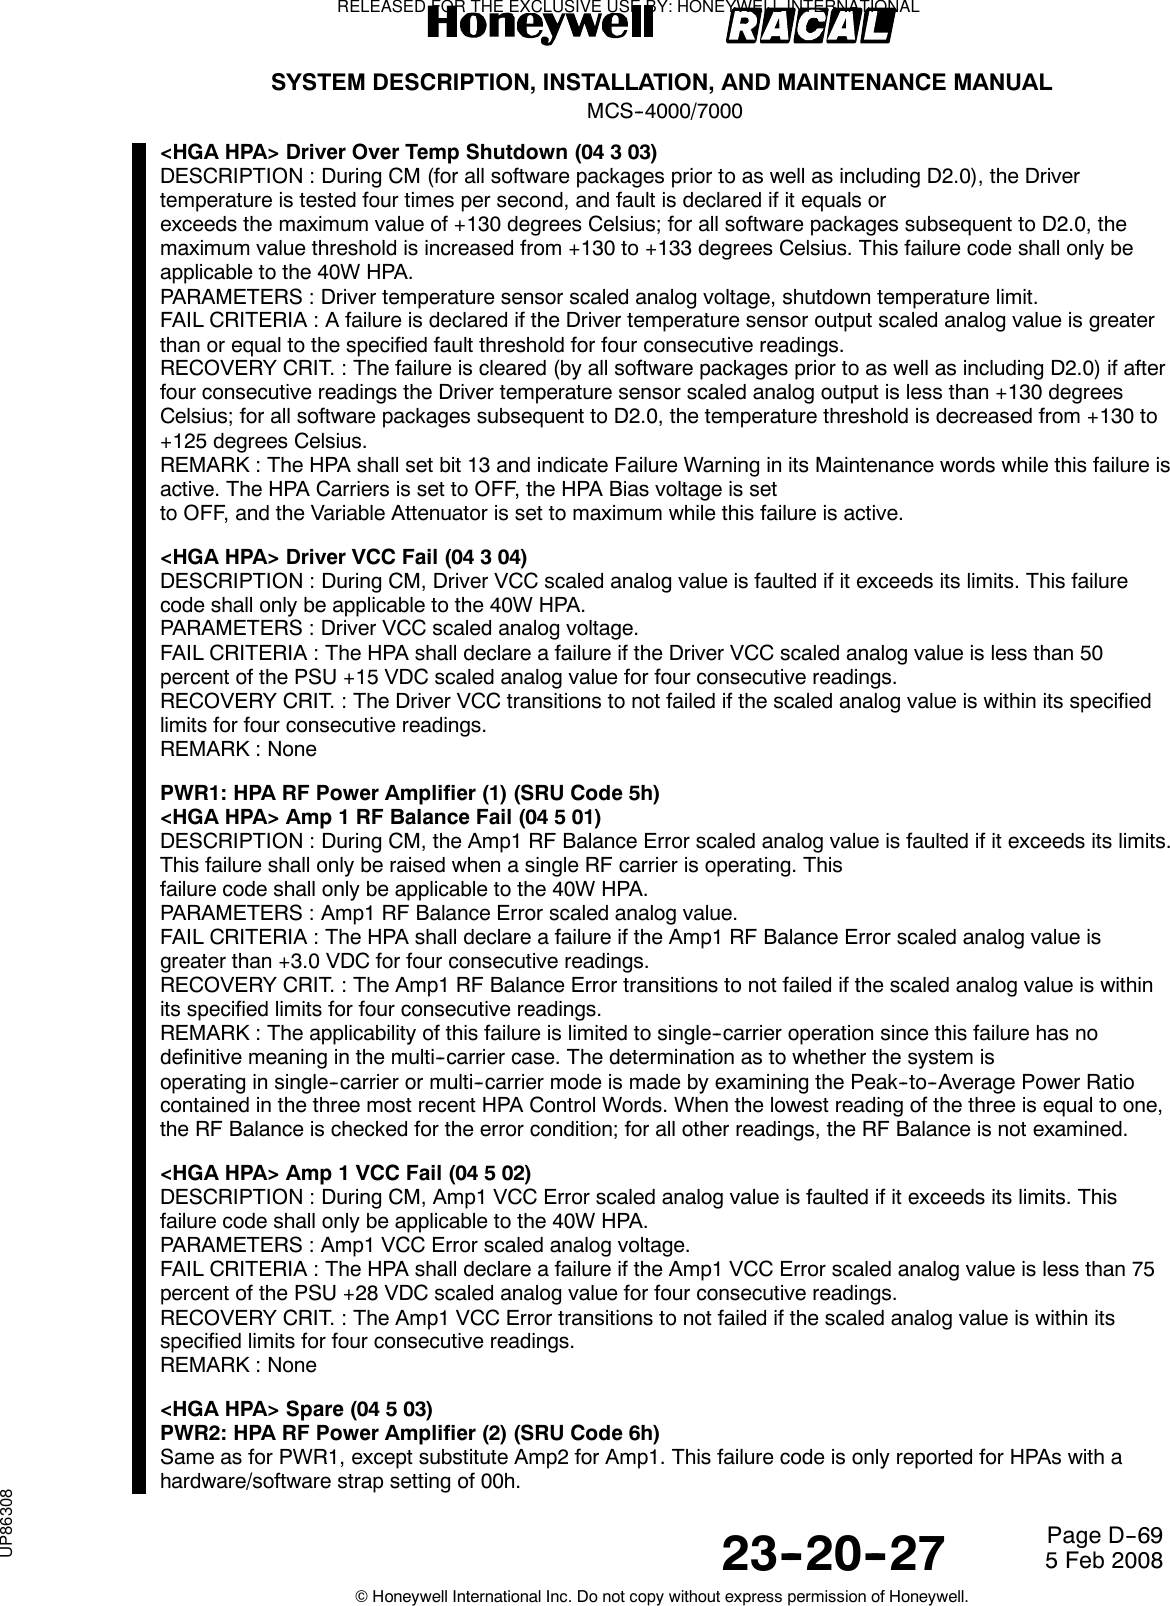 SYSTEM DESCRIPTION, INSTALLATION, AND MAINTENANCE MANUALMCS--4000/700023--20--27 5 Feb 2008©Honeywell International Inc. Do not copy without express permission of Honeywell.Page D--69&lt;HGA HPA&gt; Driver Over Temp Shutdown (04 3 03)DESCRIPTION : During CM (for all software packages prior to as well as including D2.0), the Drivertemperature is tested four times per second, and fault is declared if it equals orexceeds the maximum value of +130 degrees Celsius; for all software packages subsequent to D2.0, themaximum value threshold is increased from +130 to +133 degrees Celsius. This failure code shall only beapplicable to the 40W HPA.PARAMETERS : Driver temperature sensor scaled analog voltage, shutdown temperature limit.FAIL CRITERIA : A failure is declared if the Driver temperature sensor output scaled analog value is greaterthan or equal to the specified fault threshold for four consecutive readings.RECOVERY CRIT. : The failure is cleared (by all software packages prior to as well as including D2.0) if afterfour consecutive readings the Driver temperature sensor scaled analog output is less than +130 degreesCelsius; for all software packages subsequent to D2.0, the temperature threshold is decreased from +130 to+125 degrees Celsius.REMARK : The HPA shall set bit 13 and indicate Failure Warning in its Maintenance words while this failure isactive. The HPA Carriers is set to OFF, the HPA Bias voltage is setto OFF, and the Variable Attenuator is set to maximum while this failure is active.&lt;HGA HPA&gt; Driver VCC Fail (04 3 04)DESCRIPTION : During CM, Driver VCC scaled analog value is faulted if it exceeds its limits. This failurecode shall only be applicable to the 40W HPA.PARAMETERS : Driver VCC scaled analog voltage.FAIL CRITERIA : The HPA shall declare a failure if the Driver VCC scaled analog value is less than 50percent of the PSU +15 VDC scaled analog value for four consecutive readings.RECOVERY CRIT. : The Driver VCC transitions to not failed if the scaled analog value is within its specifiedlimits for four consecutive readings.REMARK : NonePWR1: HPA RF Power Amplifier (1) (SRU Code 5h)&lt;HGA HPA&gt; Amp 1 RF Balance Fail (04 5 01)DESCRIPTION : During CM, the Amp1 RF Balance Error scaled analog value is faulted if it exceeds its limits.This failure shall only be raised when a single RF carrier is operating. Thisfailure code shall only be applicable to the 40W HPA.PARAMETERS : Amp1 RF Balance Error scaled analog value.FAIL CRITERIA : The HPA shall declare a failure if the Amp1 RF Balance Error scaled analog value isgreater than +3.0 VDC for four consecutive readings.RECOVERY CRIT. : The Amp1 RF Balance Error transitions to not failed if the scaled analog value is withinits specified limits for four consecutive readings.REMARK : The applicability of this failure is limited to single--carrier operation since this failure has nodefinitive meaning in the multi--carrier case. The determination as to whether the system isoperating in single--carrier or multi--carrier mode is made by examining the Peak--to--Average Power Ratiocontained in the three most recent HPA Control Words. When the lowest reading of the three is equal to one,the RF Balance is checked for the error condition; for all other readings, the RF Balance is not examined.&lt;HGA HPA&gt; Amp 1 VCC Fail (04 5 02)DESCRIPTION : During CM, Amp1 VCC Error scaled analog value is faulted if it exceeds its limits. Thisfailure code shall only be applicable to the 40W HPA.PARAMETERS : Amp1 VCC Error scaled analog voltage.FAIL CRITERIA : The HPA shall declare a failure if the Amp1 VCC Error scaled analog value is less than 75percent of the PSU +28 VDC scaled analog value for four consecutive readings.RECOVERY CRIT. : The Amp1 VCC Error transitions to not failed if the scaled analog value is within itsspecified limits for four consecutive readings.REMARK : None&lt;HGA HPA&gt; Spare (04 5 03)PWR2: HPA RF Power Amplifier (2) (SRU Code 6h)Same as for PWR1, except substitute Amp2 for Amp1. This failure code is only reported for HPAs with ahardware/software strap setting of 00h.RELEASED FOR THE EXCLUSIVE USE BY: HONEYWELL INTERNATIONALUP86308